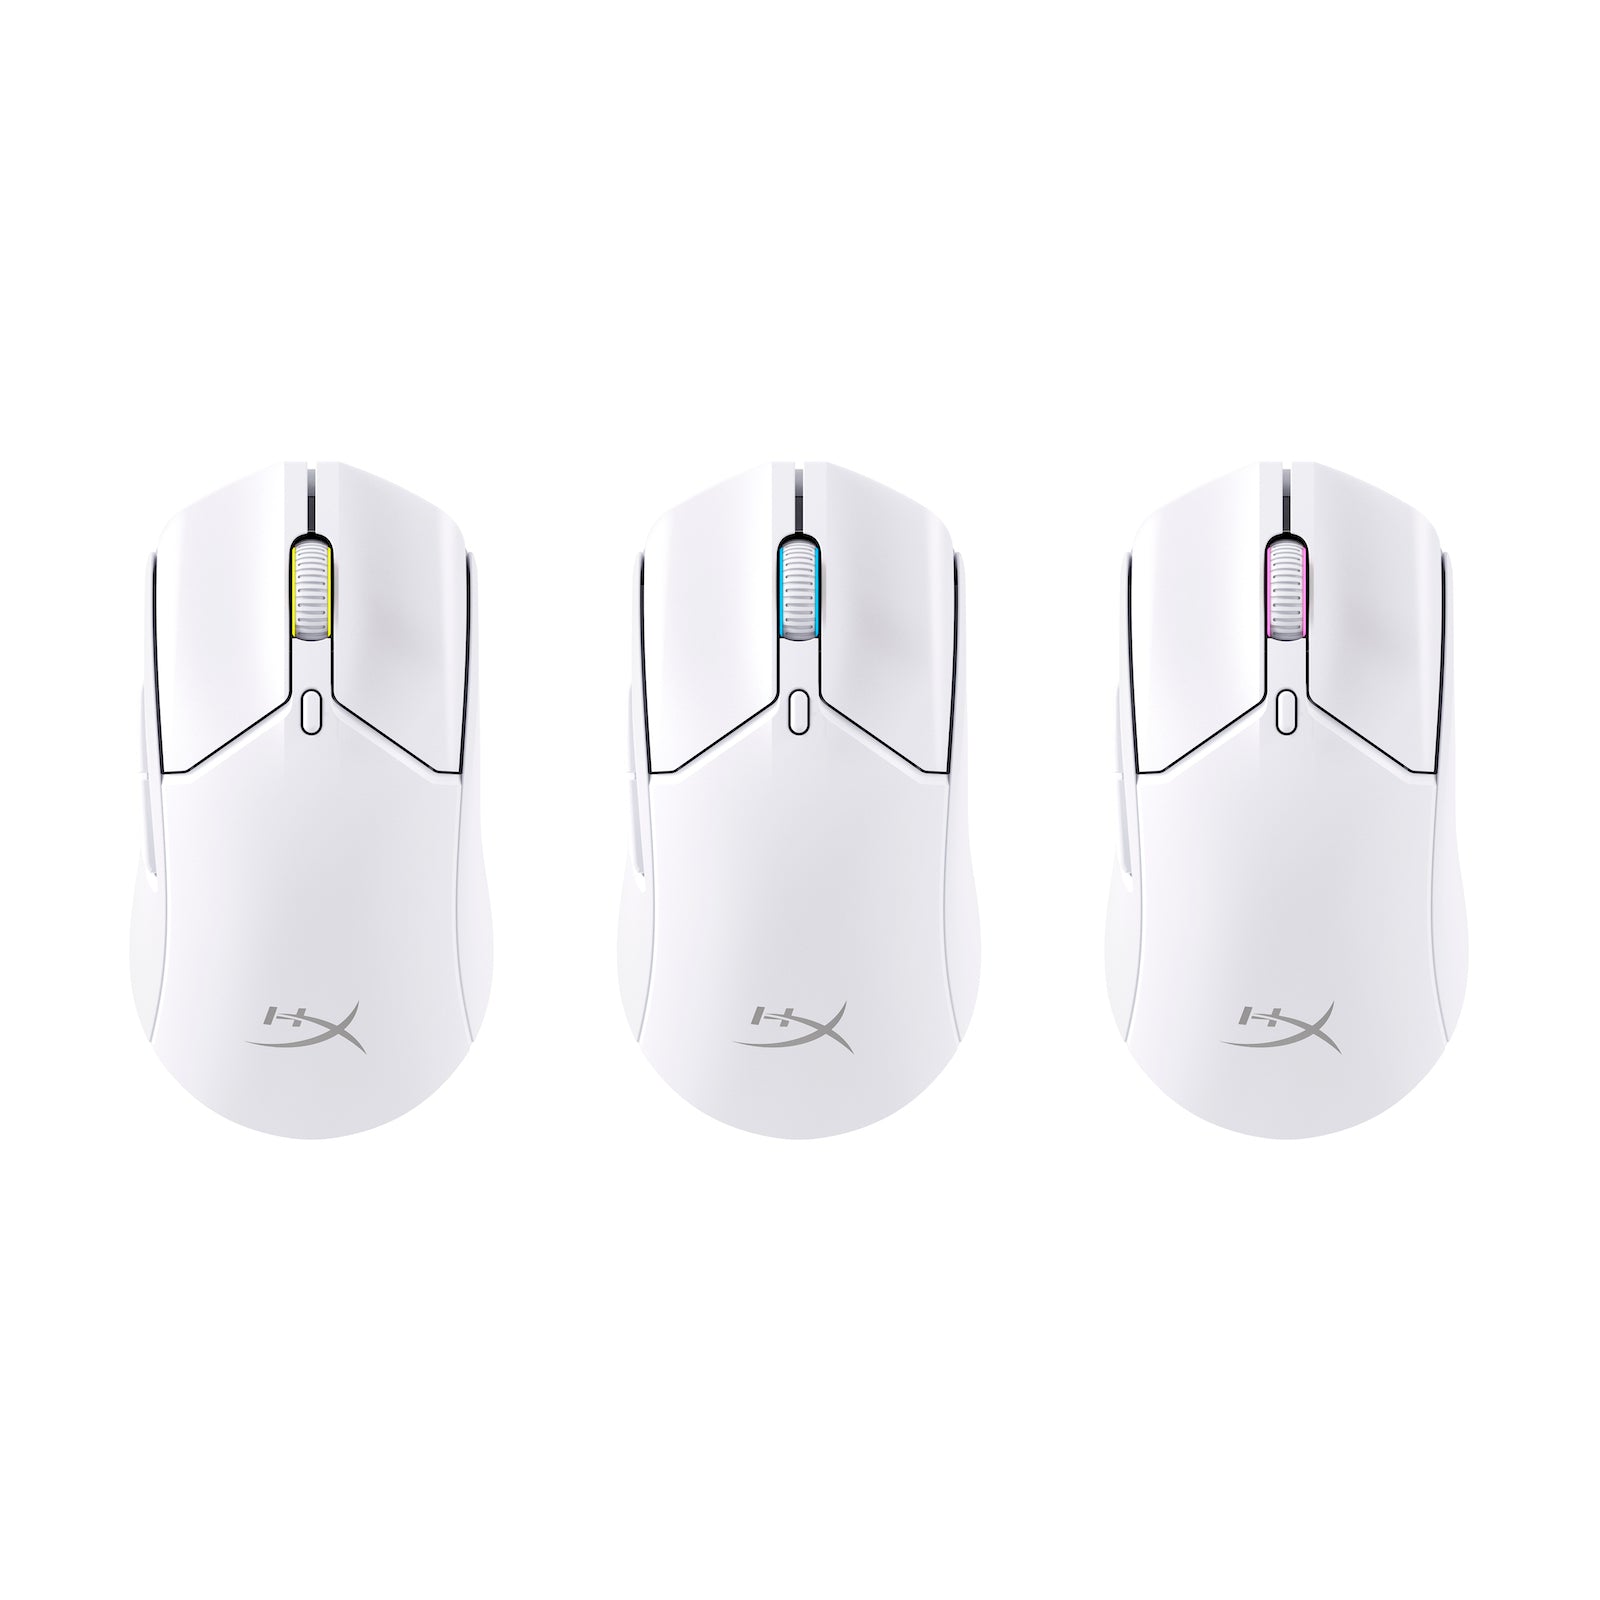 HyperX Pulsefire Haste 2 Wireless White Gaming Mouse showing RGB functions